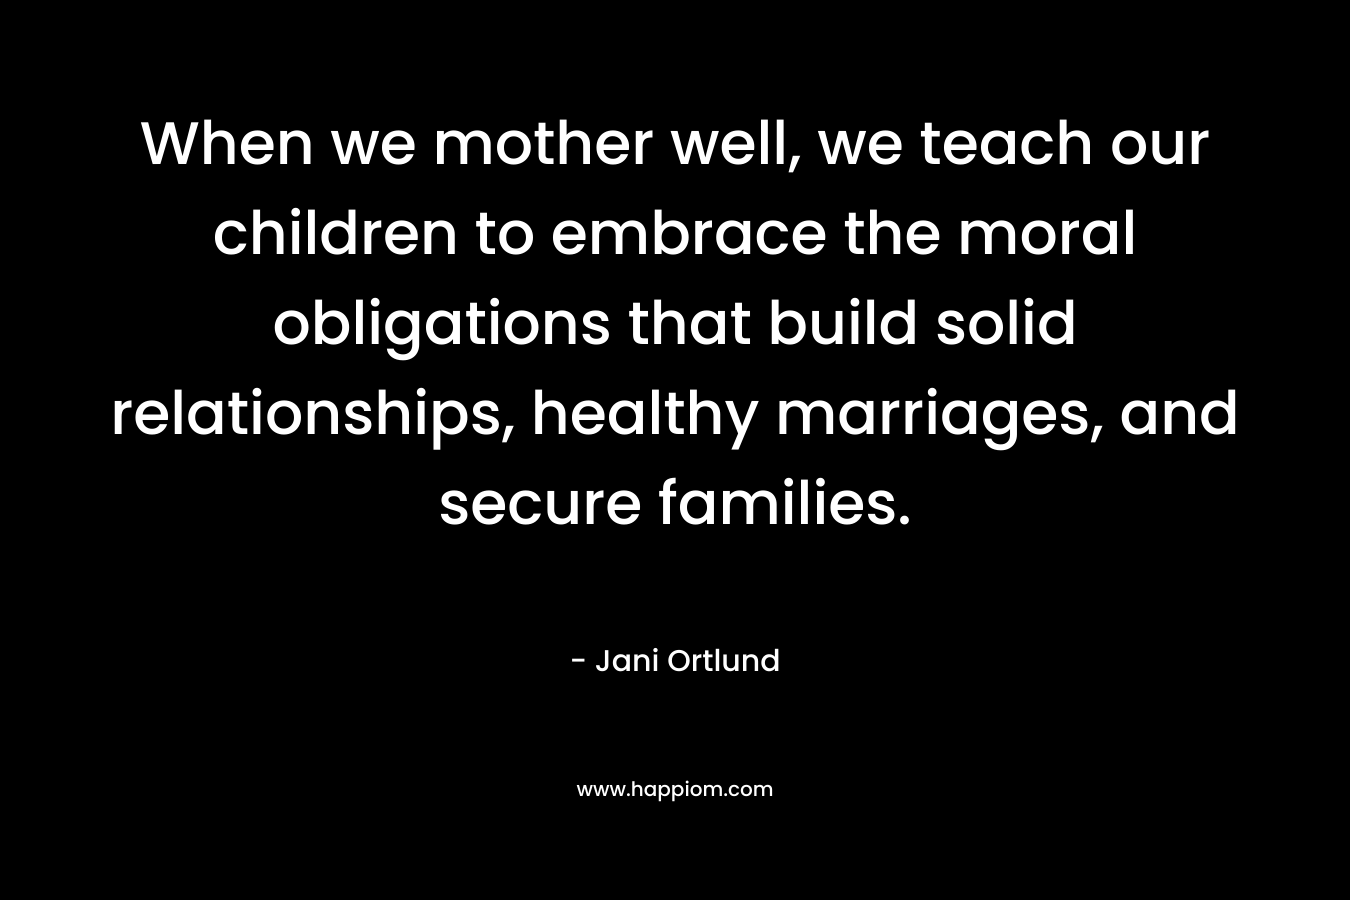 When we mother well, we teach our children to embrace the moral obligations that build solid relationships, healthy marriages, and secure families. – Jani Ortlund